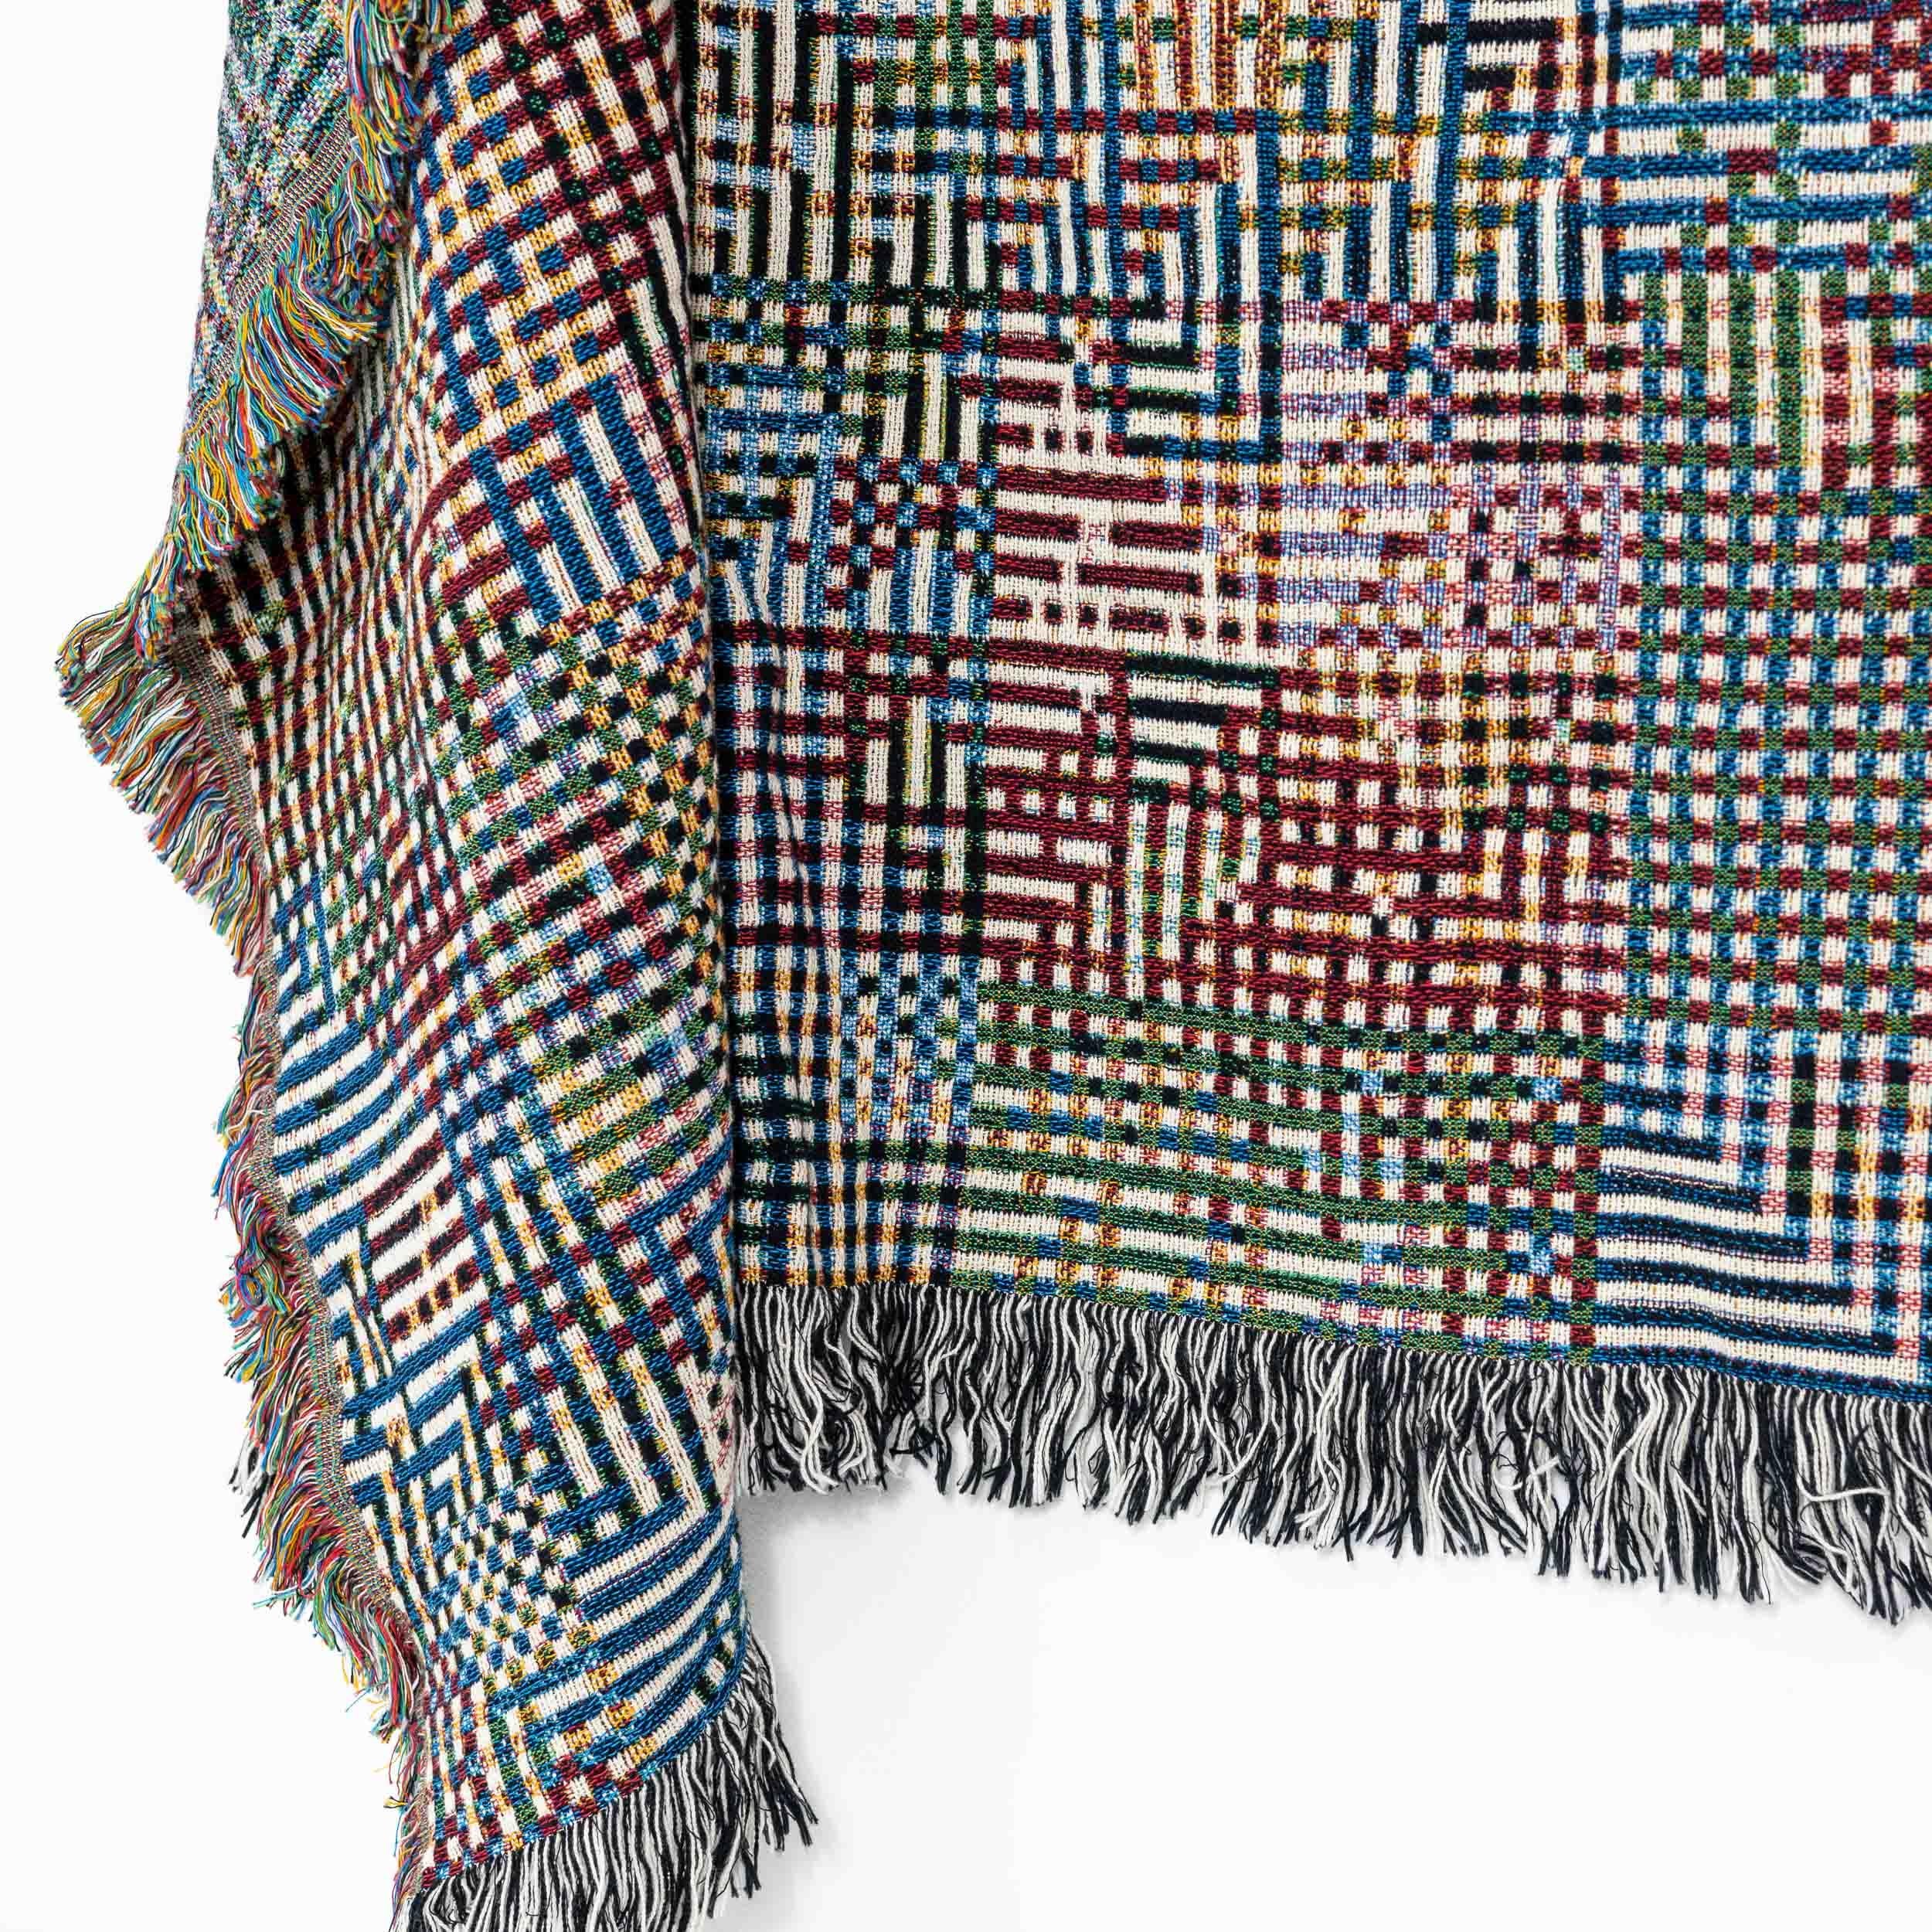 Bit map series 01 by Luft Tanaka Studio 

A multicolored and visually striking throw blanket / wall tapestry woven out of 100 % cotton yarn.

Measures: 50